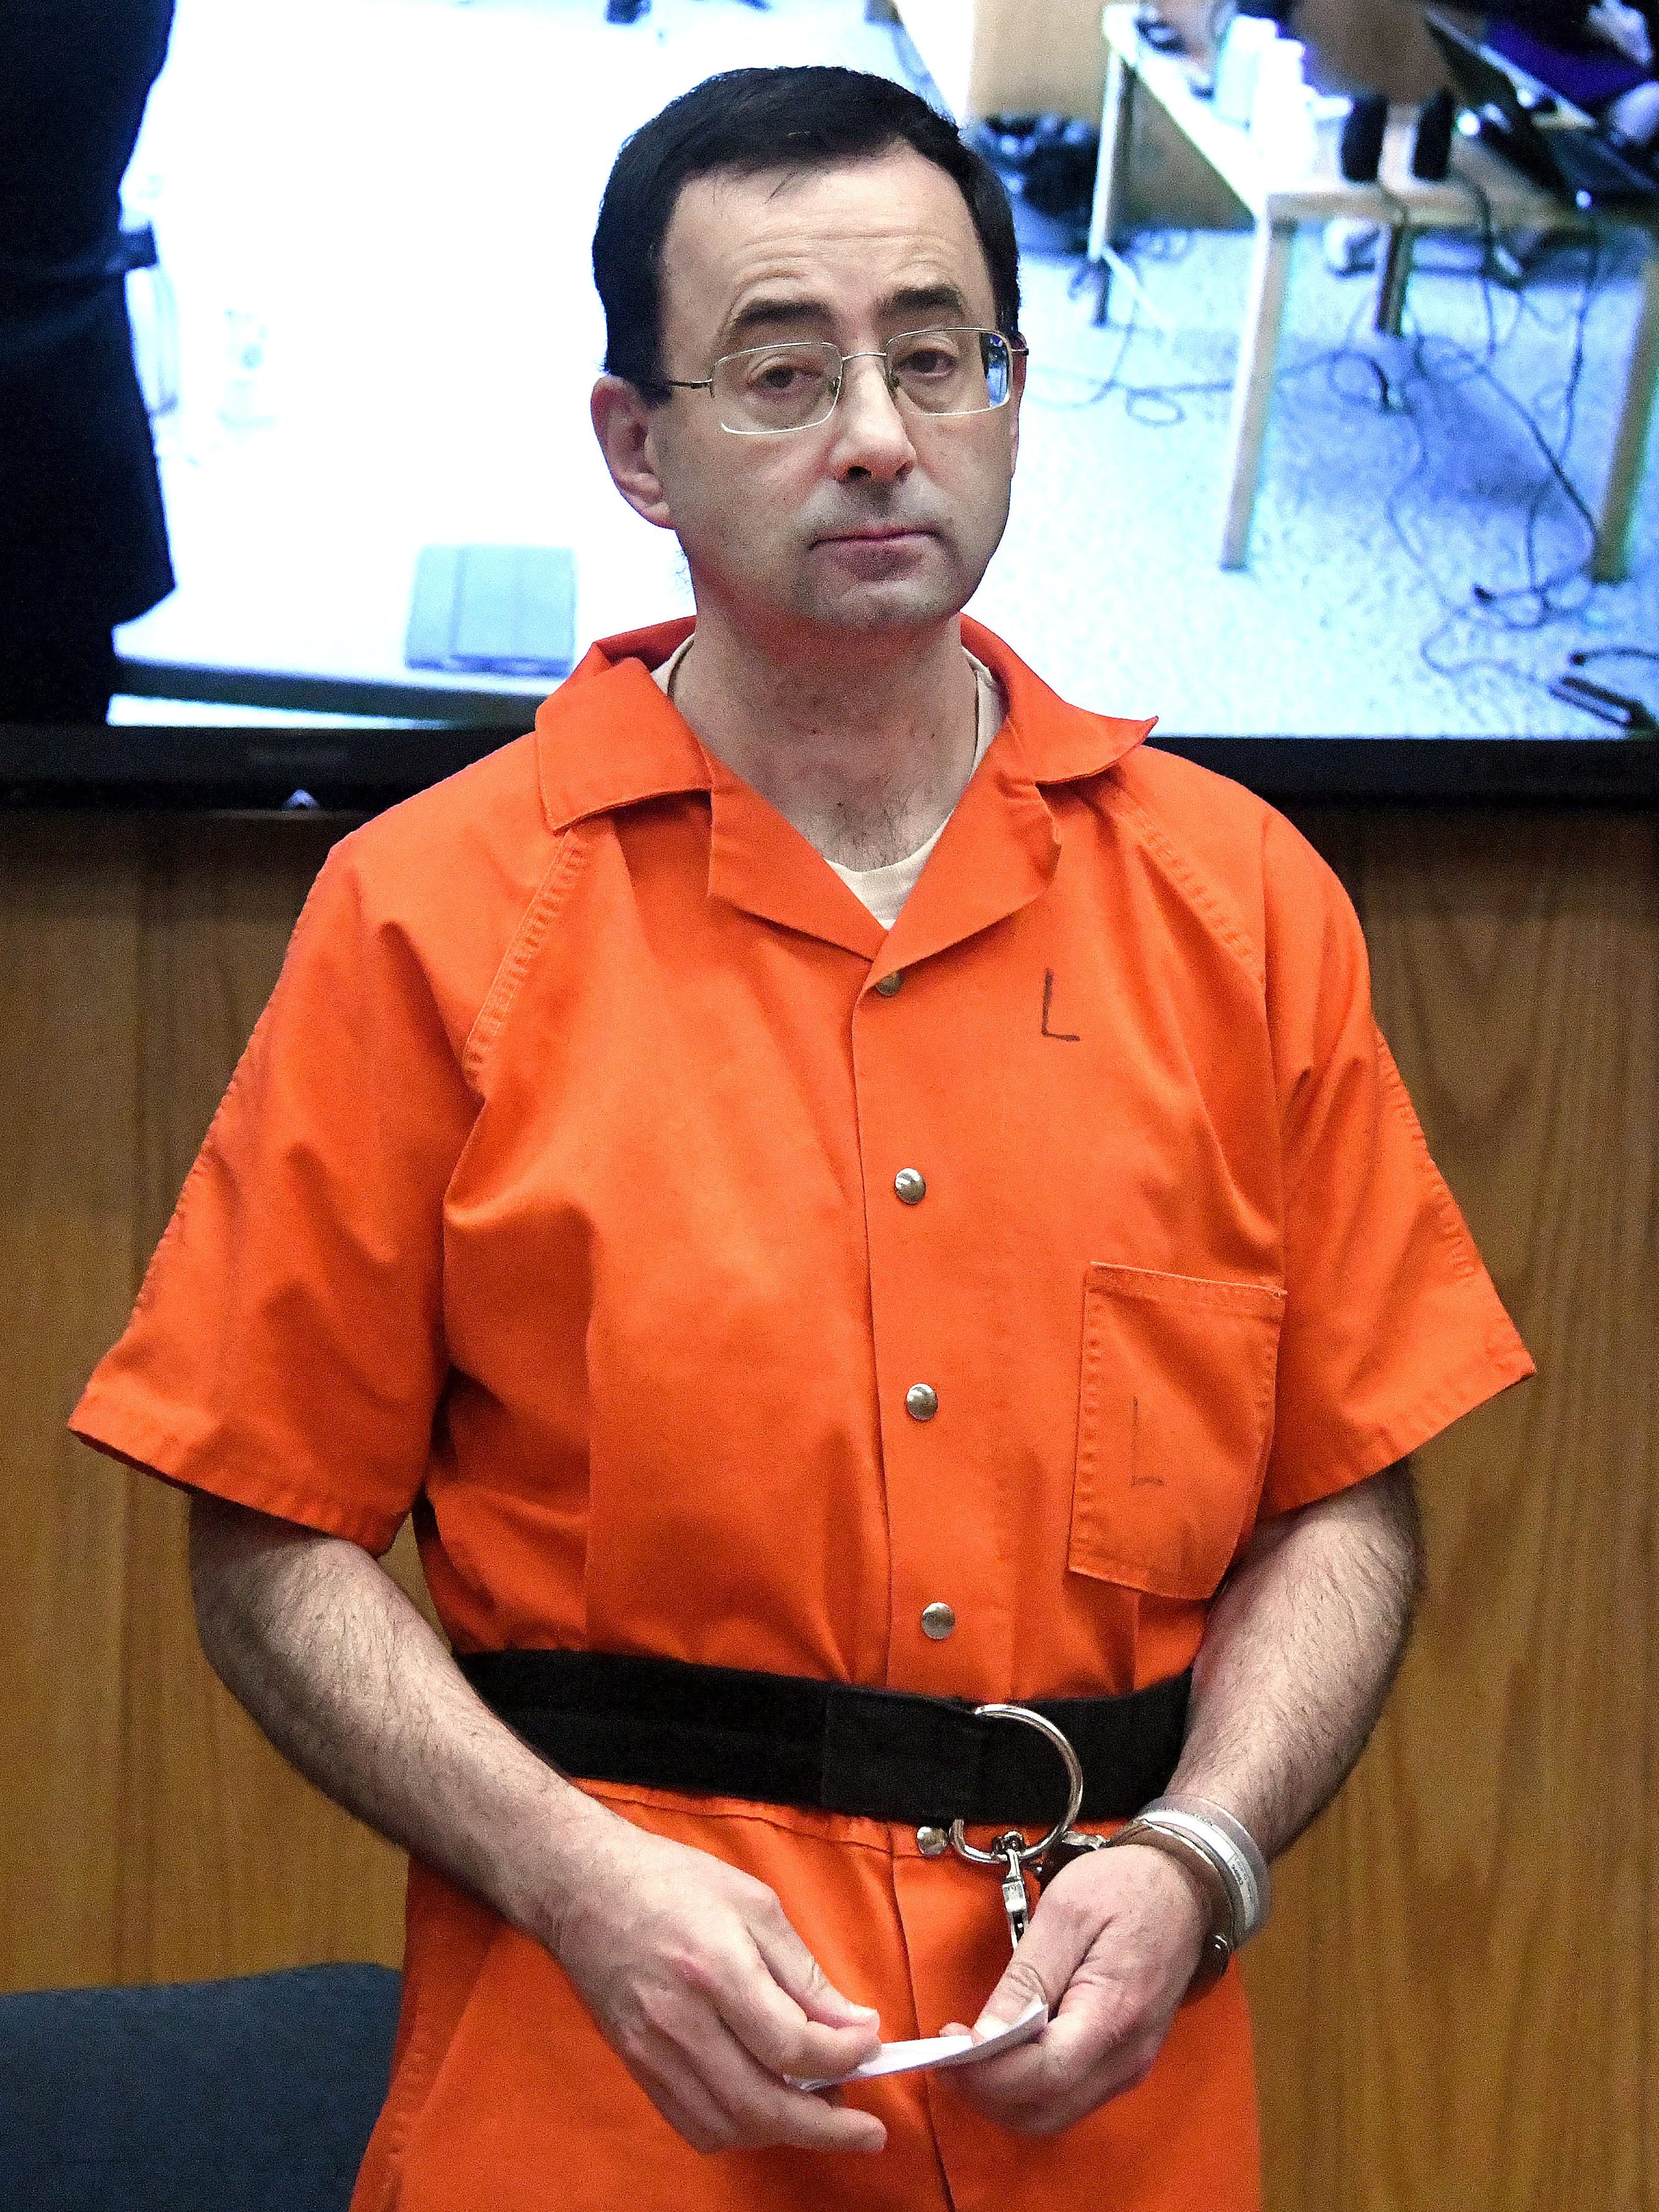 Larry Nassar appears at his sentencing in the court of Judge Janice Cunningham and receives a sentence of 40-125 years in prison on Feb. 5, 2018 in Charlotte, Michigan.